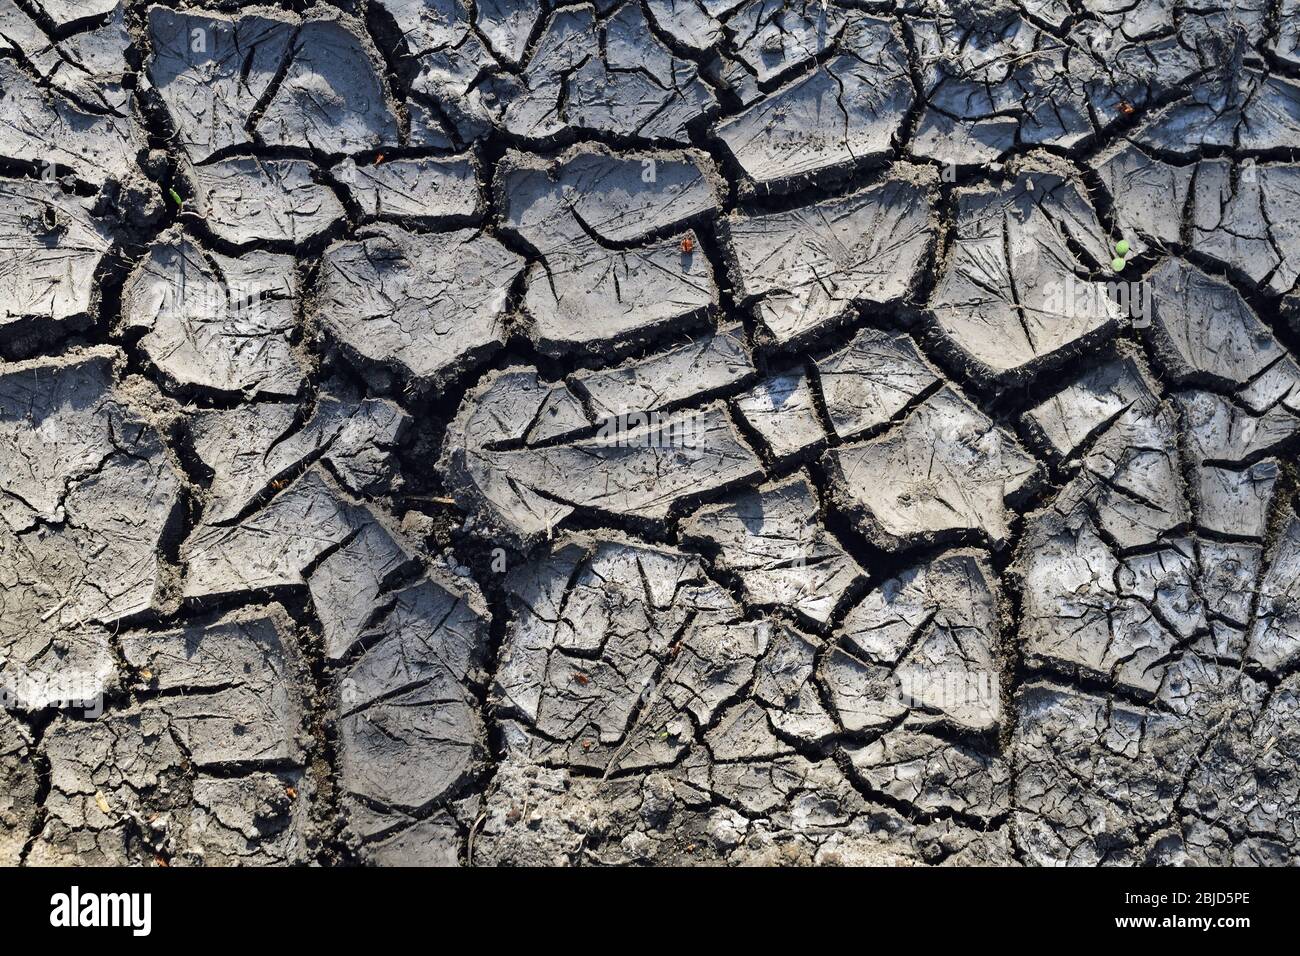 Cracked soil after long drought Stock Photo